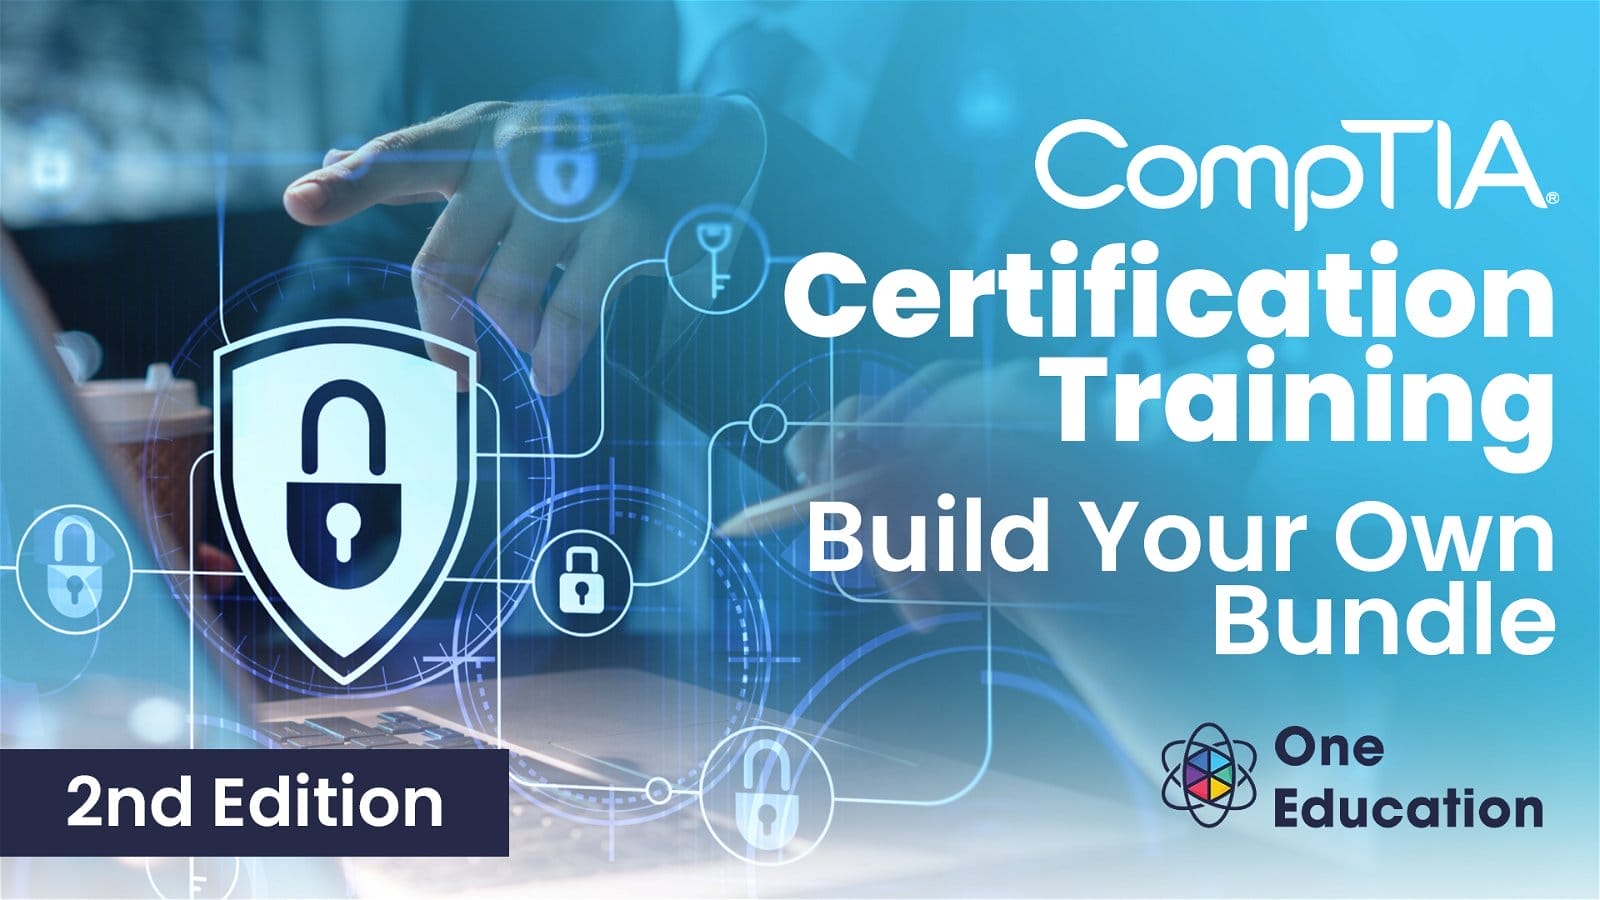 ''CompTIA Certification Training: Build Your Own Bundle'' and the One Education logo are on the right-hand side of the image. The background has two people in front of a laptop wearing formal clothes, one pointing at the screen and the other holding a pencil. This image fades into a light blue at the sides. The words ''2nd Edition'' are in the bottom left-hand corner.